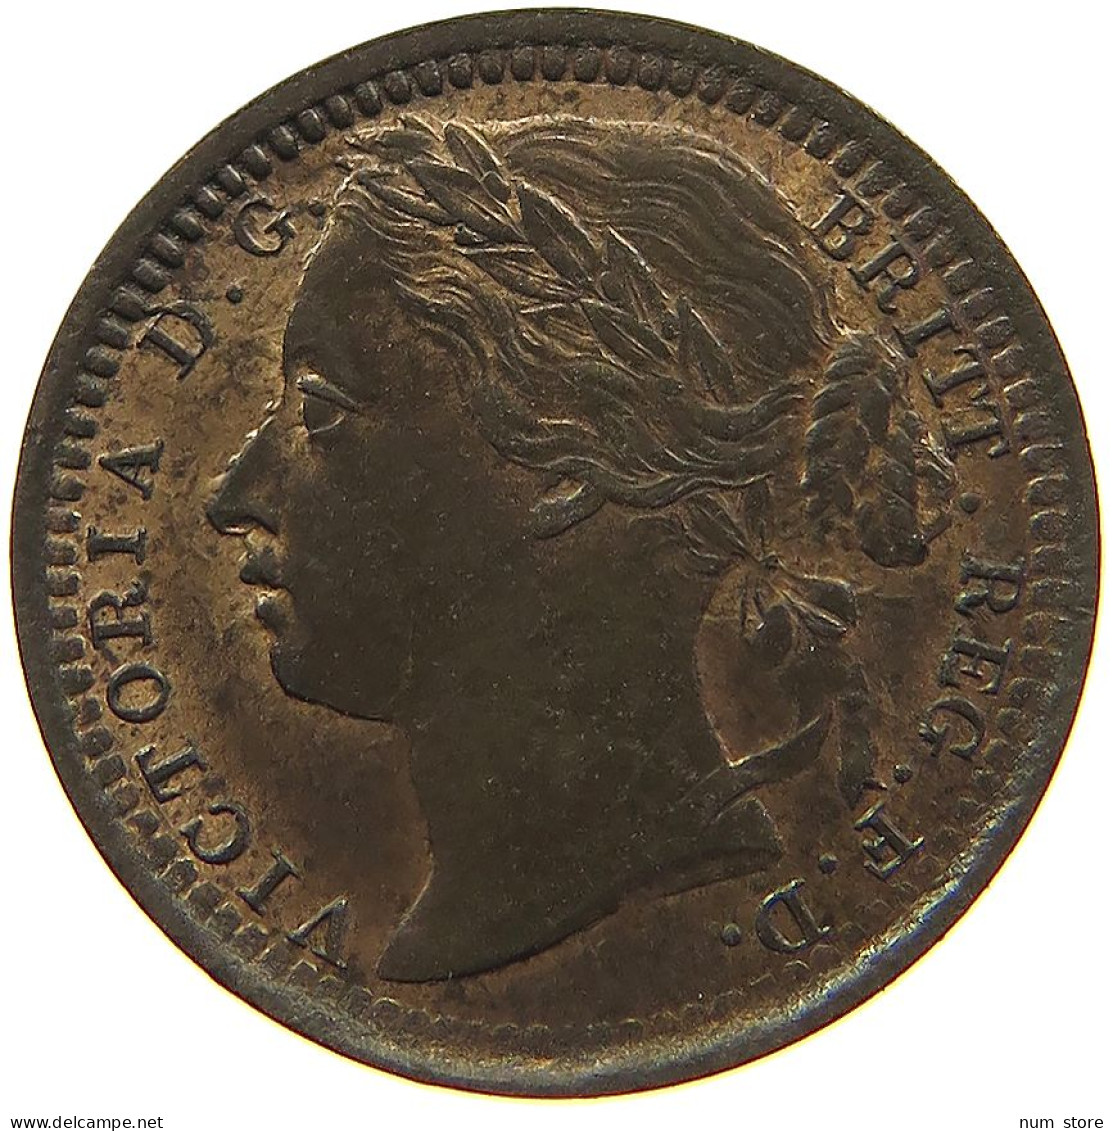 GREAT BRITAIN 1/3 FARTHING 1868 Victoria 1837-1901 #t018 0465 - A. 1/4 - 1/3 - 1/2 Farthing